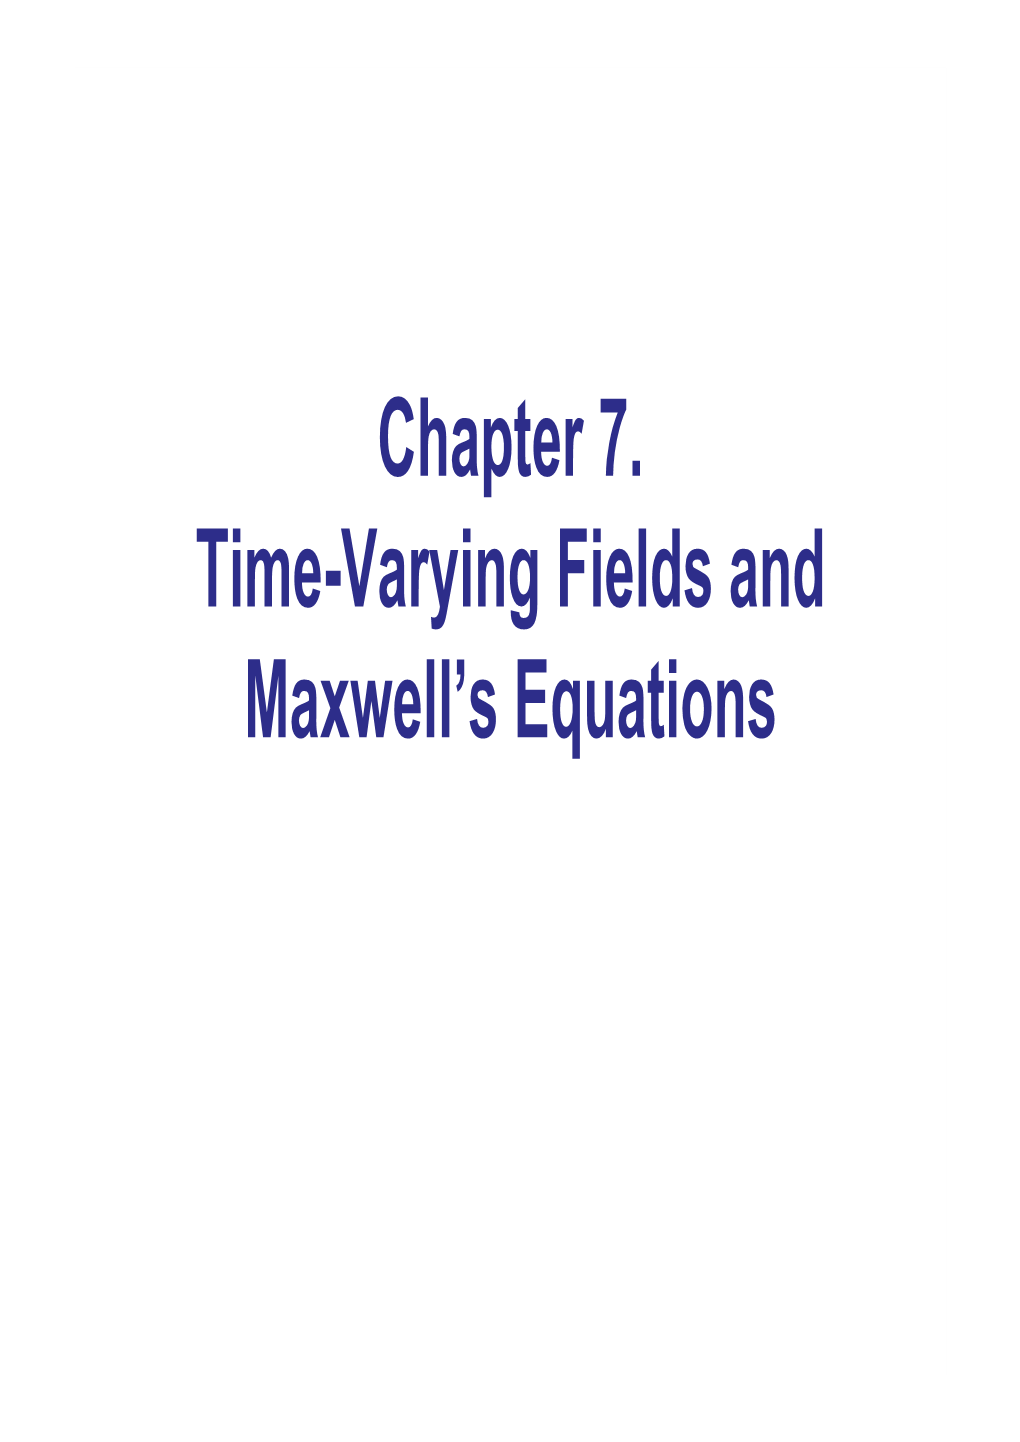 Chapter 7. Time-Varying Fields and Maxwell's Equations